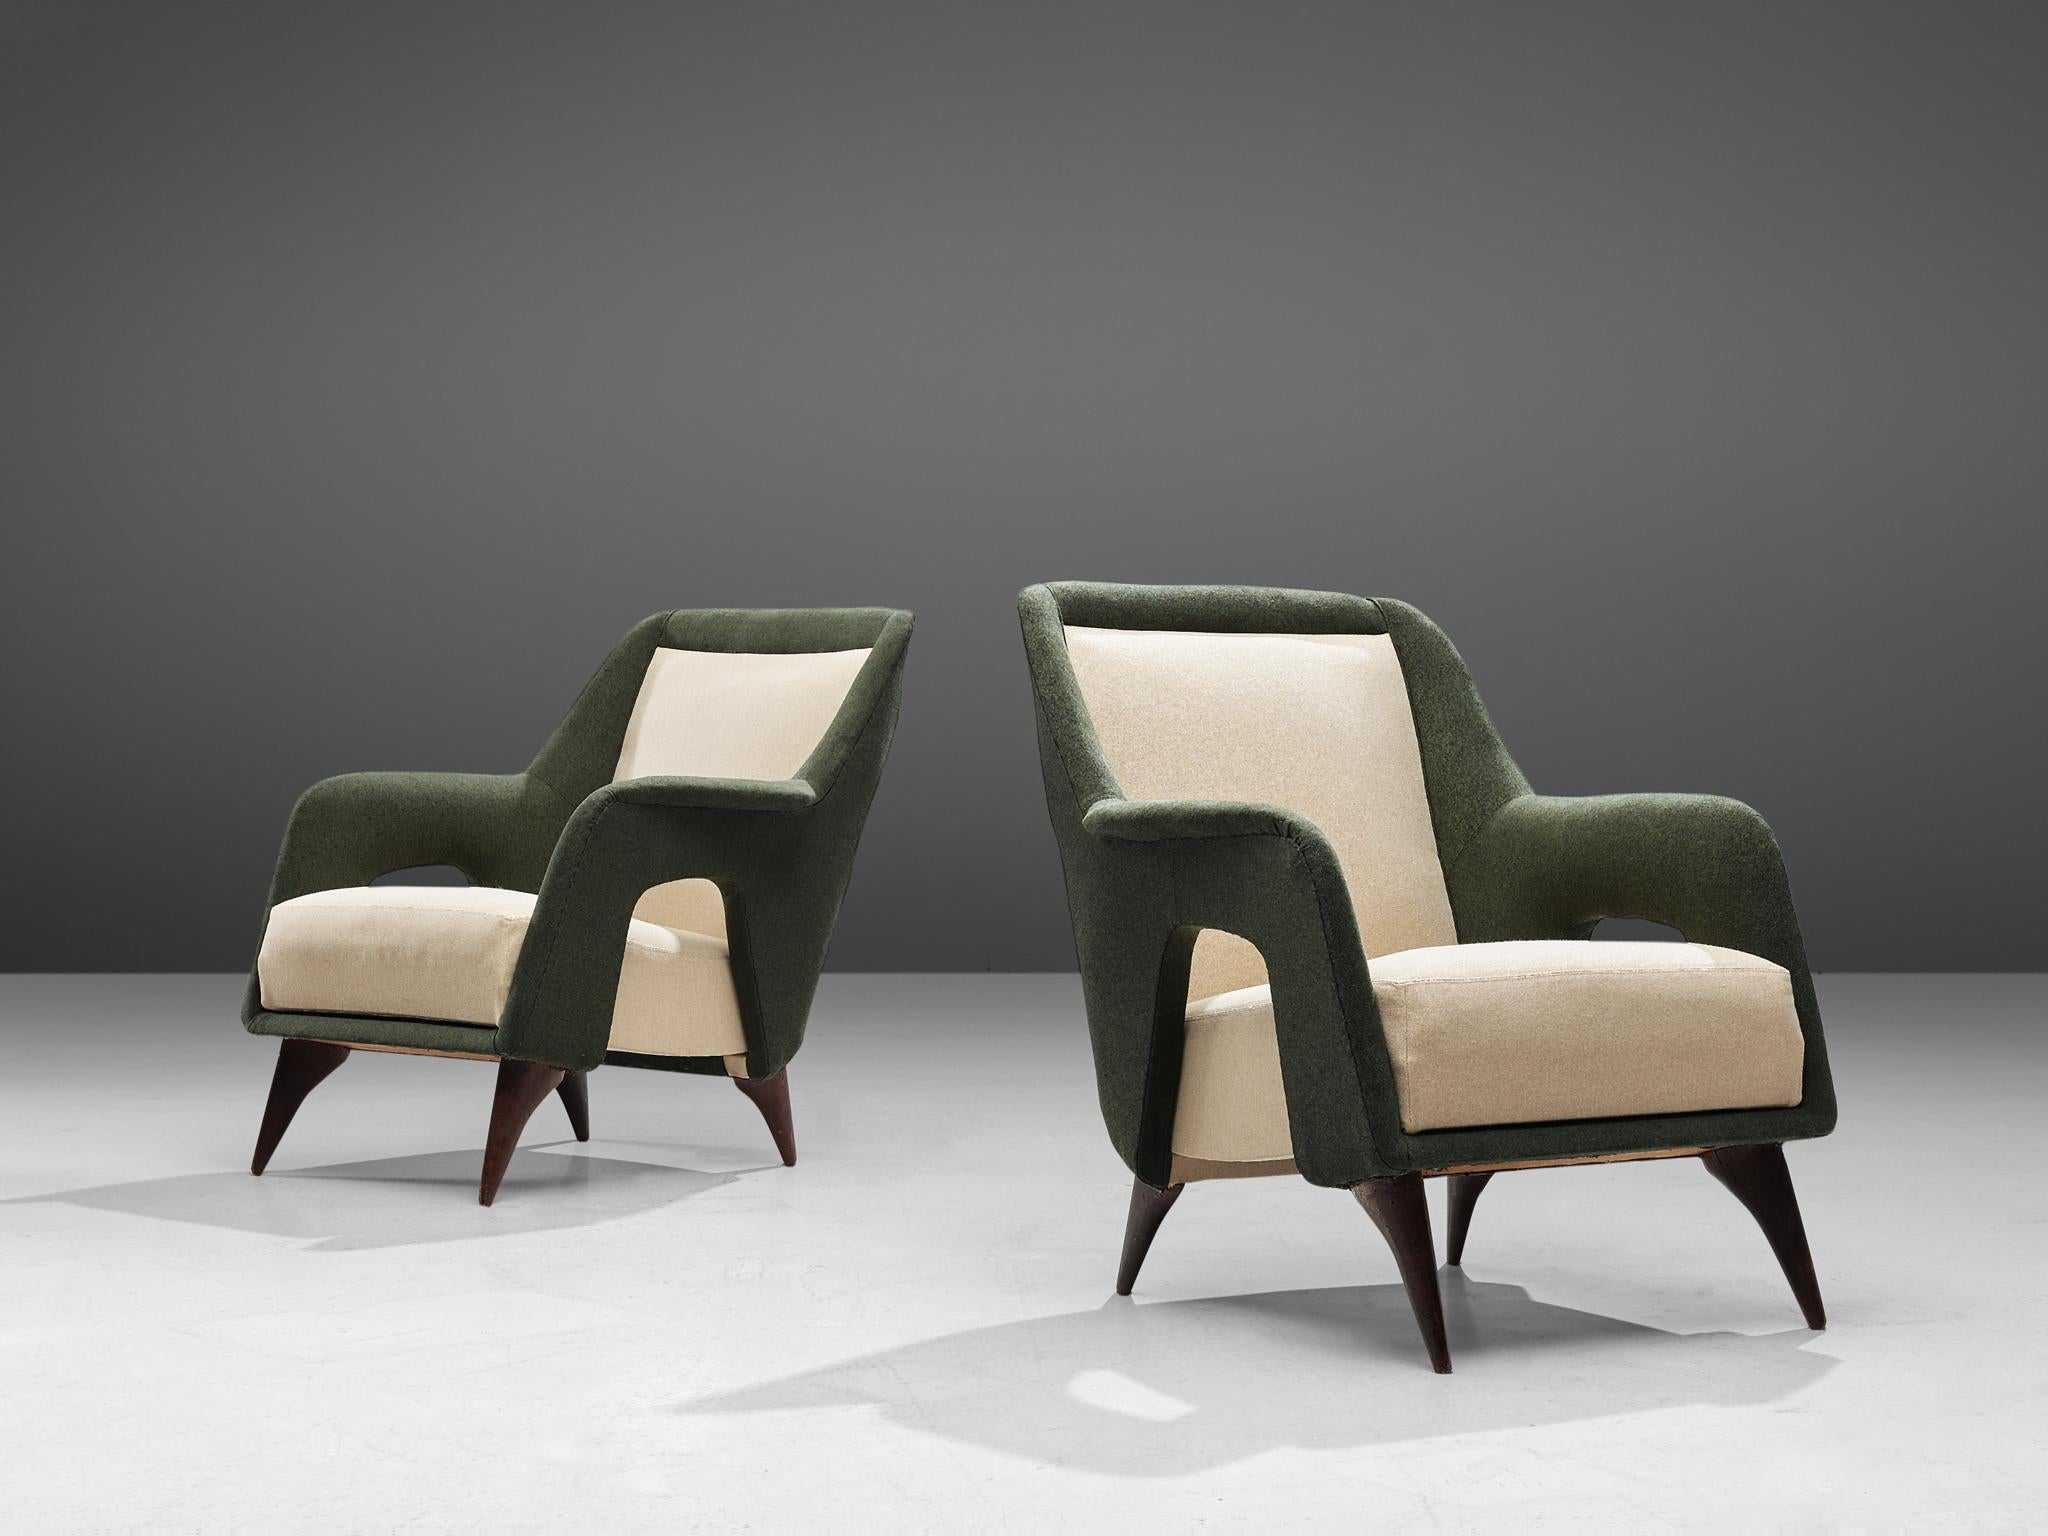 Pair of lounge chairs, fabric and walnut, Italy, 1960s

Gracious set of two Italian lounge chairs in a combination of forest green and off-white fabric. The backrests flow over into the armrests, which form a shell around the seat. The sides of